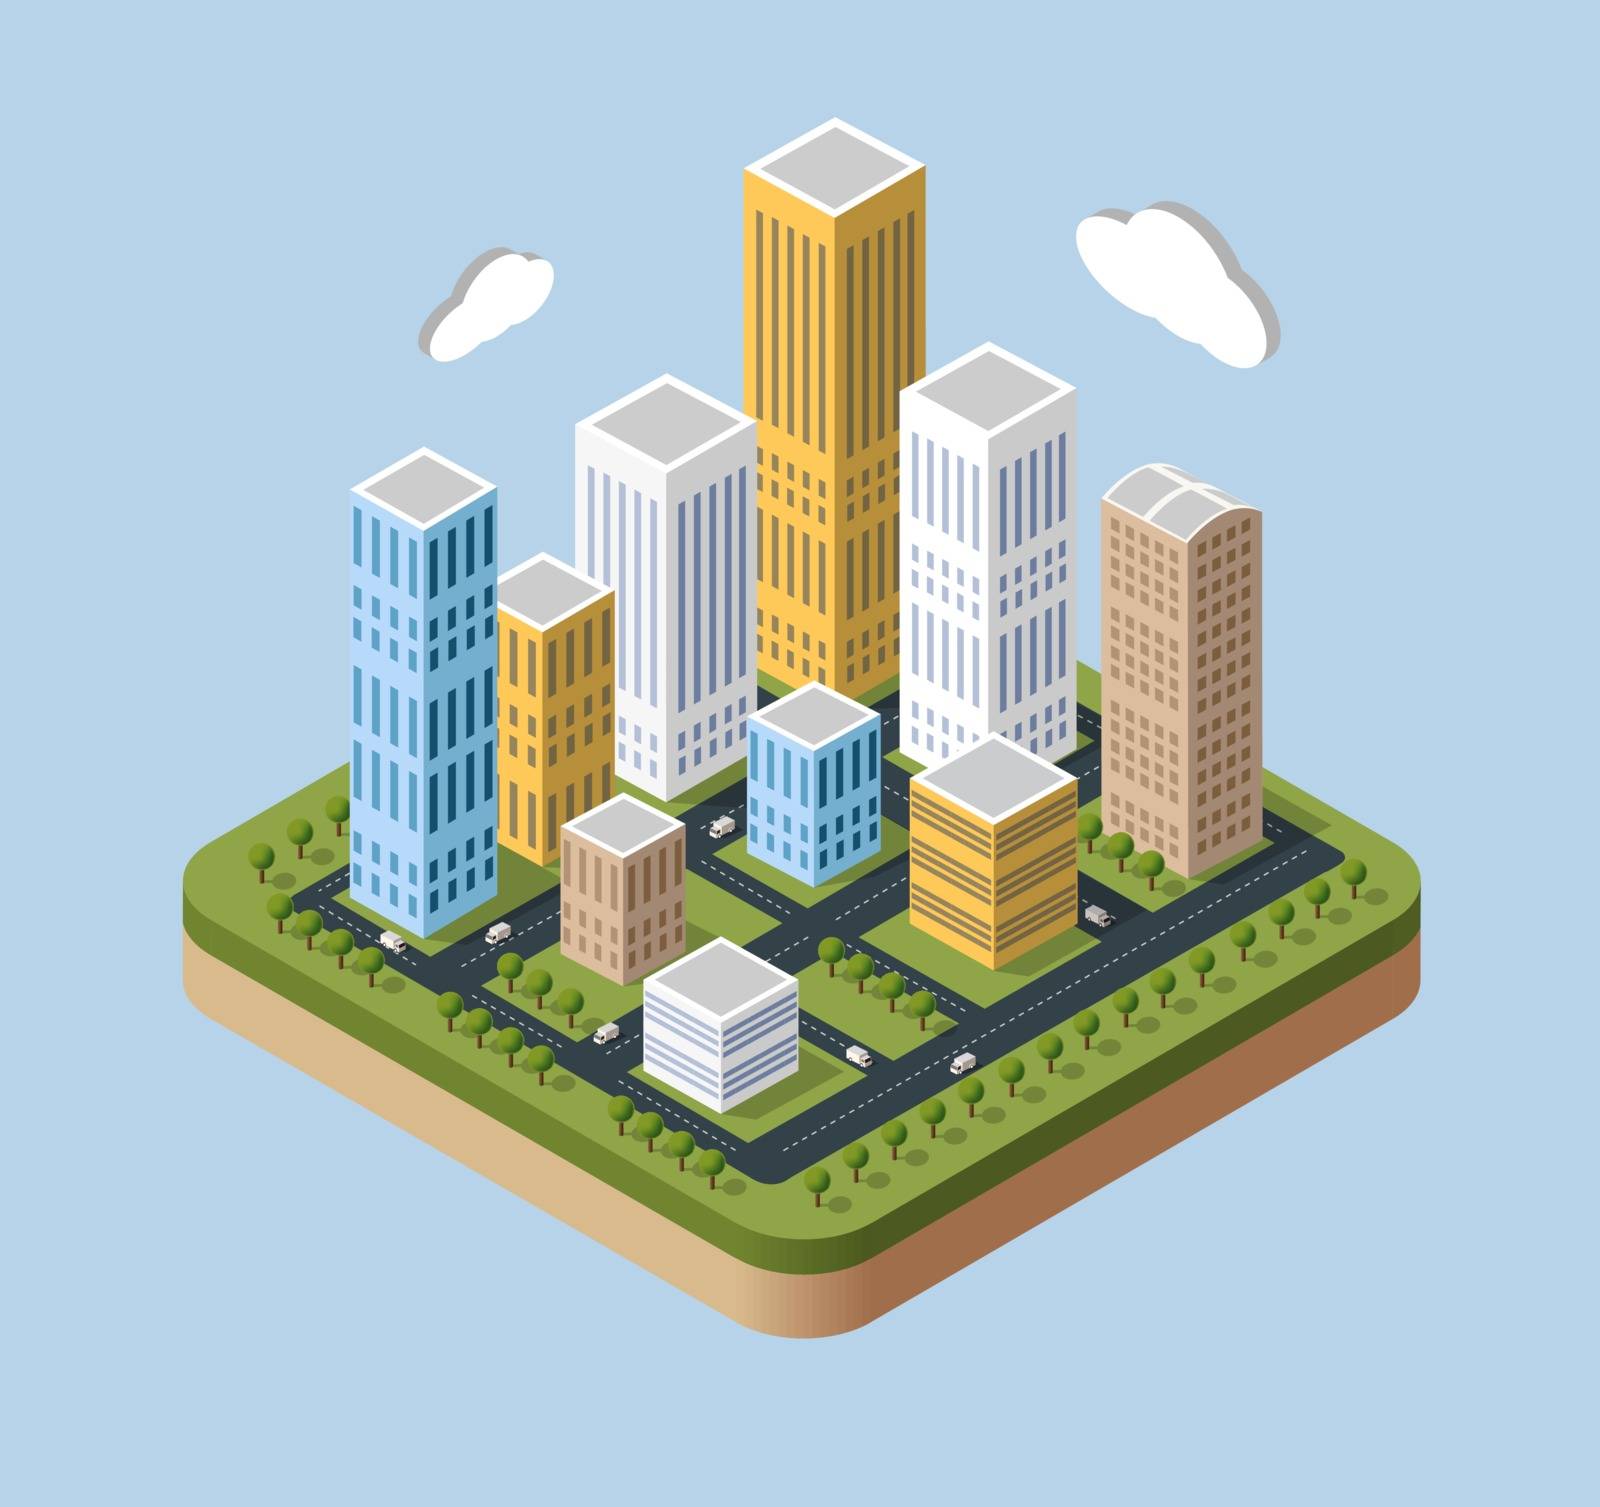  Skyscrapers and buildings in an isometric view. 